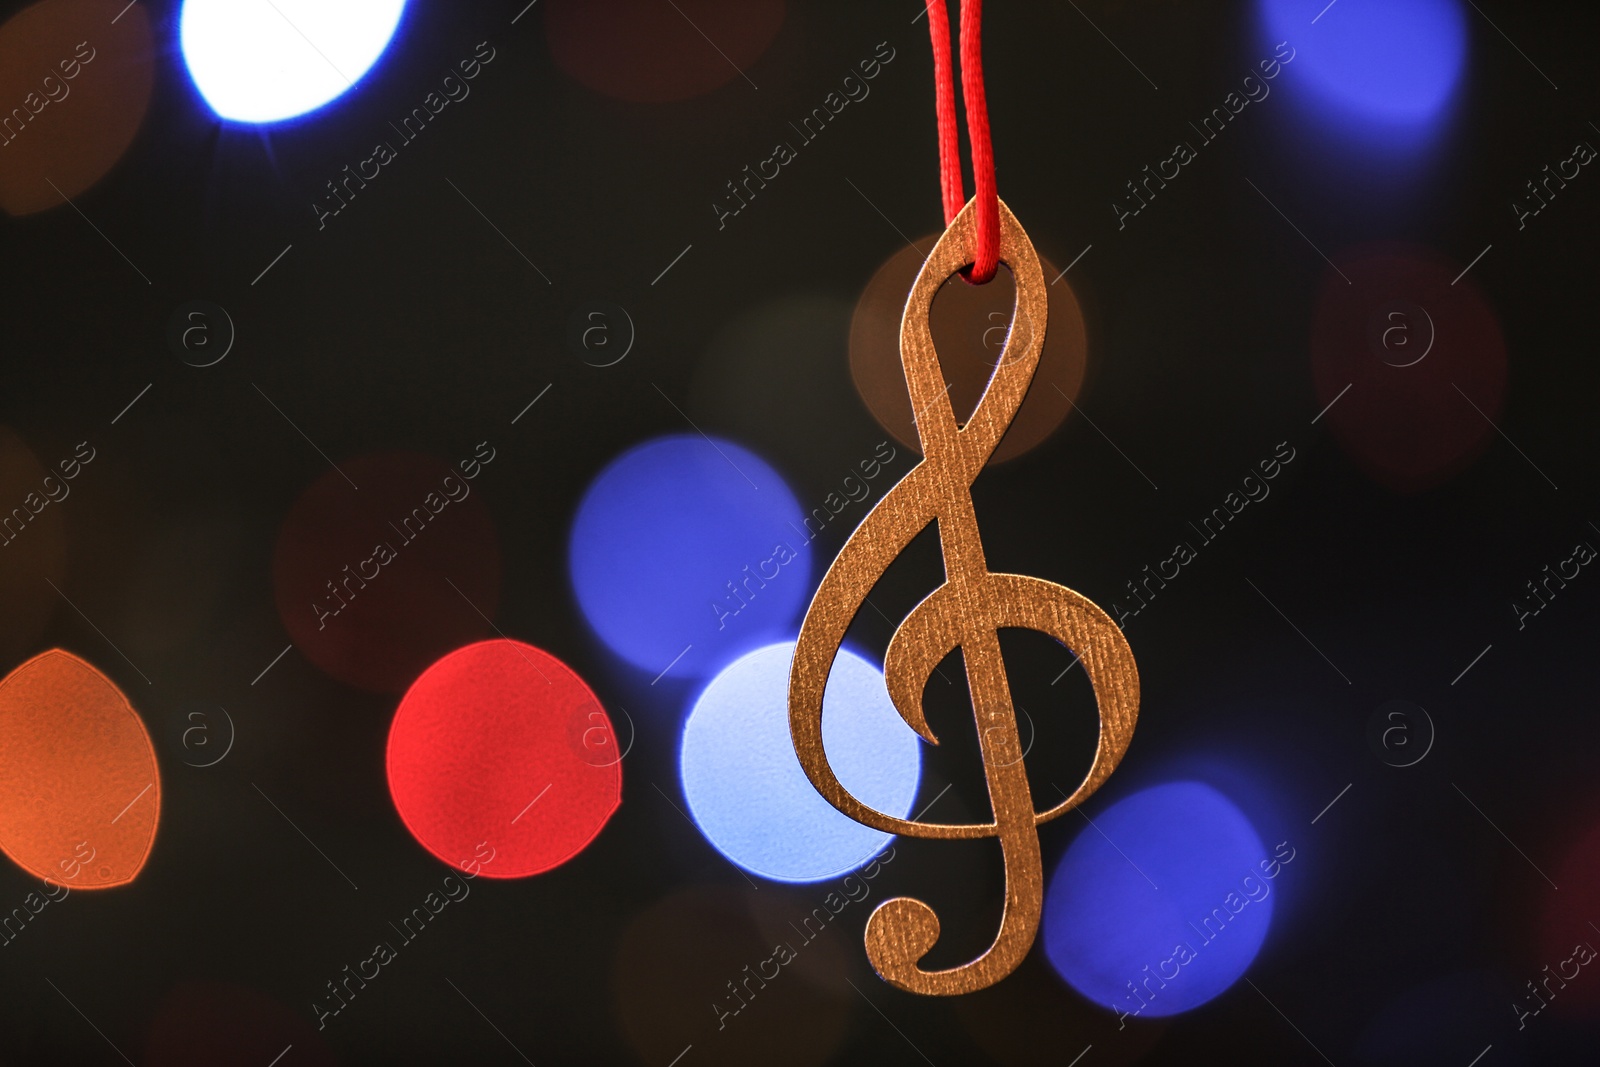 Photo of Wooden treble clef against blurred lights. Christmas music